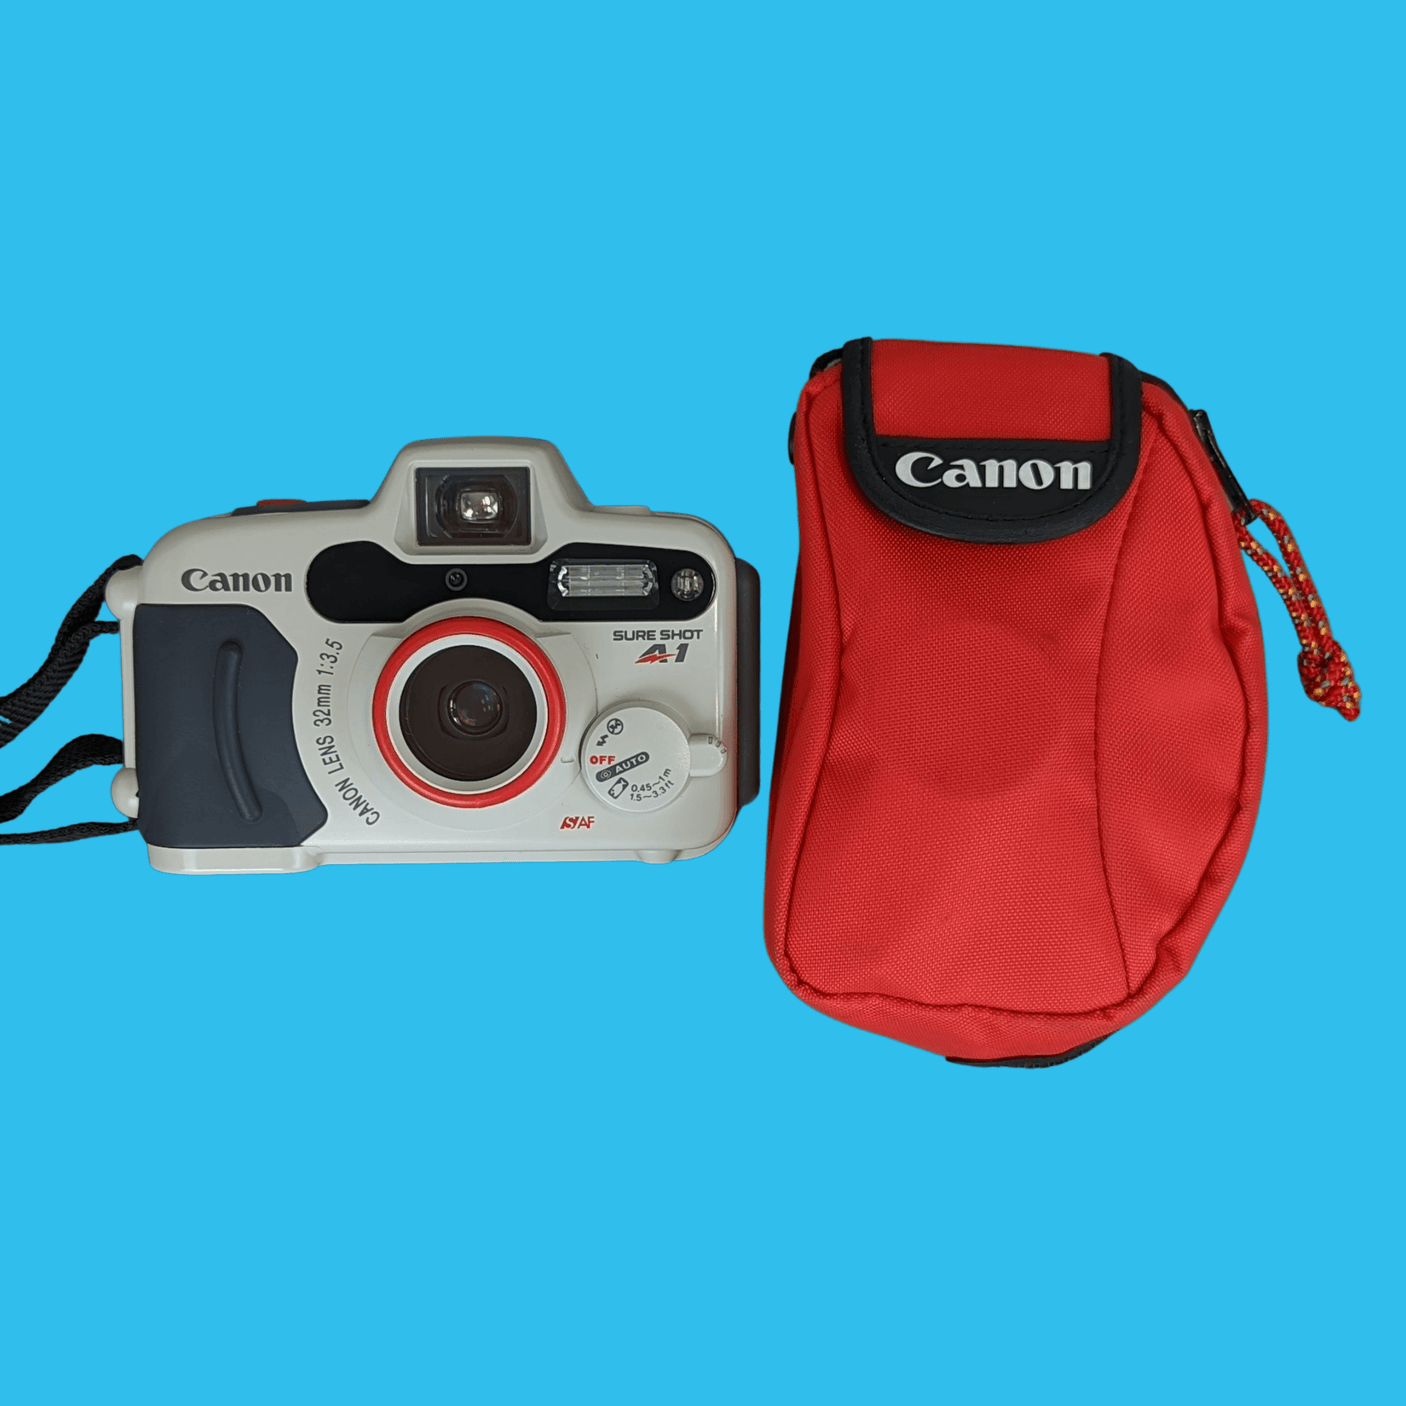 Canon Sure Shot A1 Waterproof 35mm Film Camera Point and Shoot